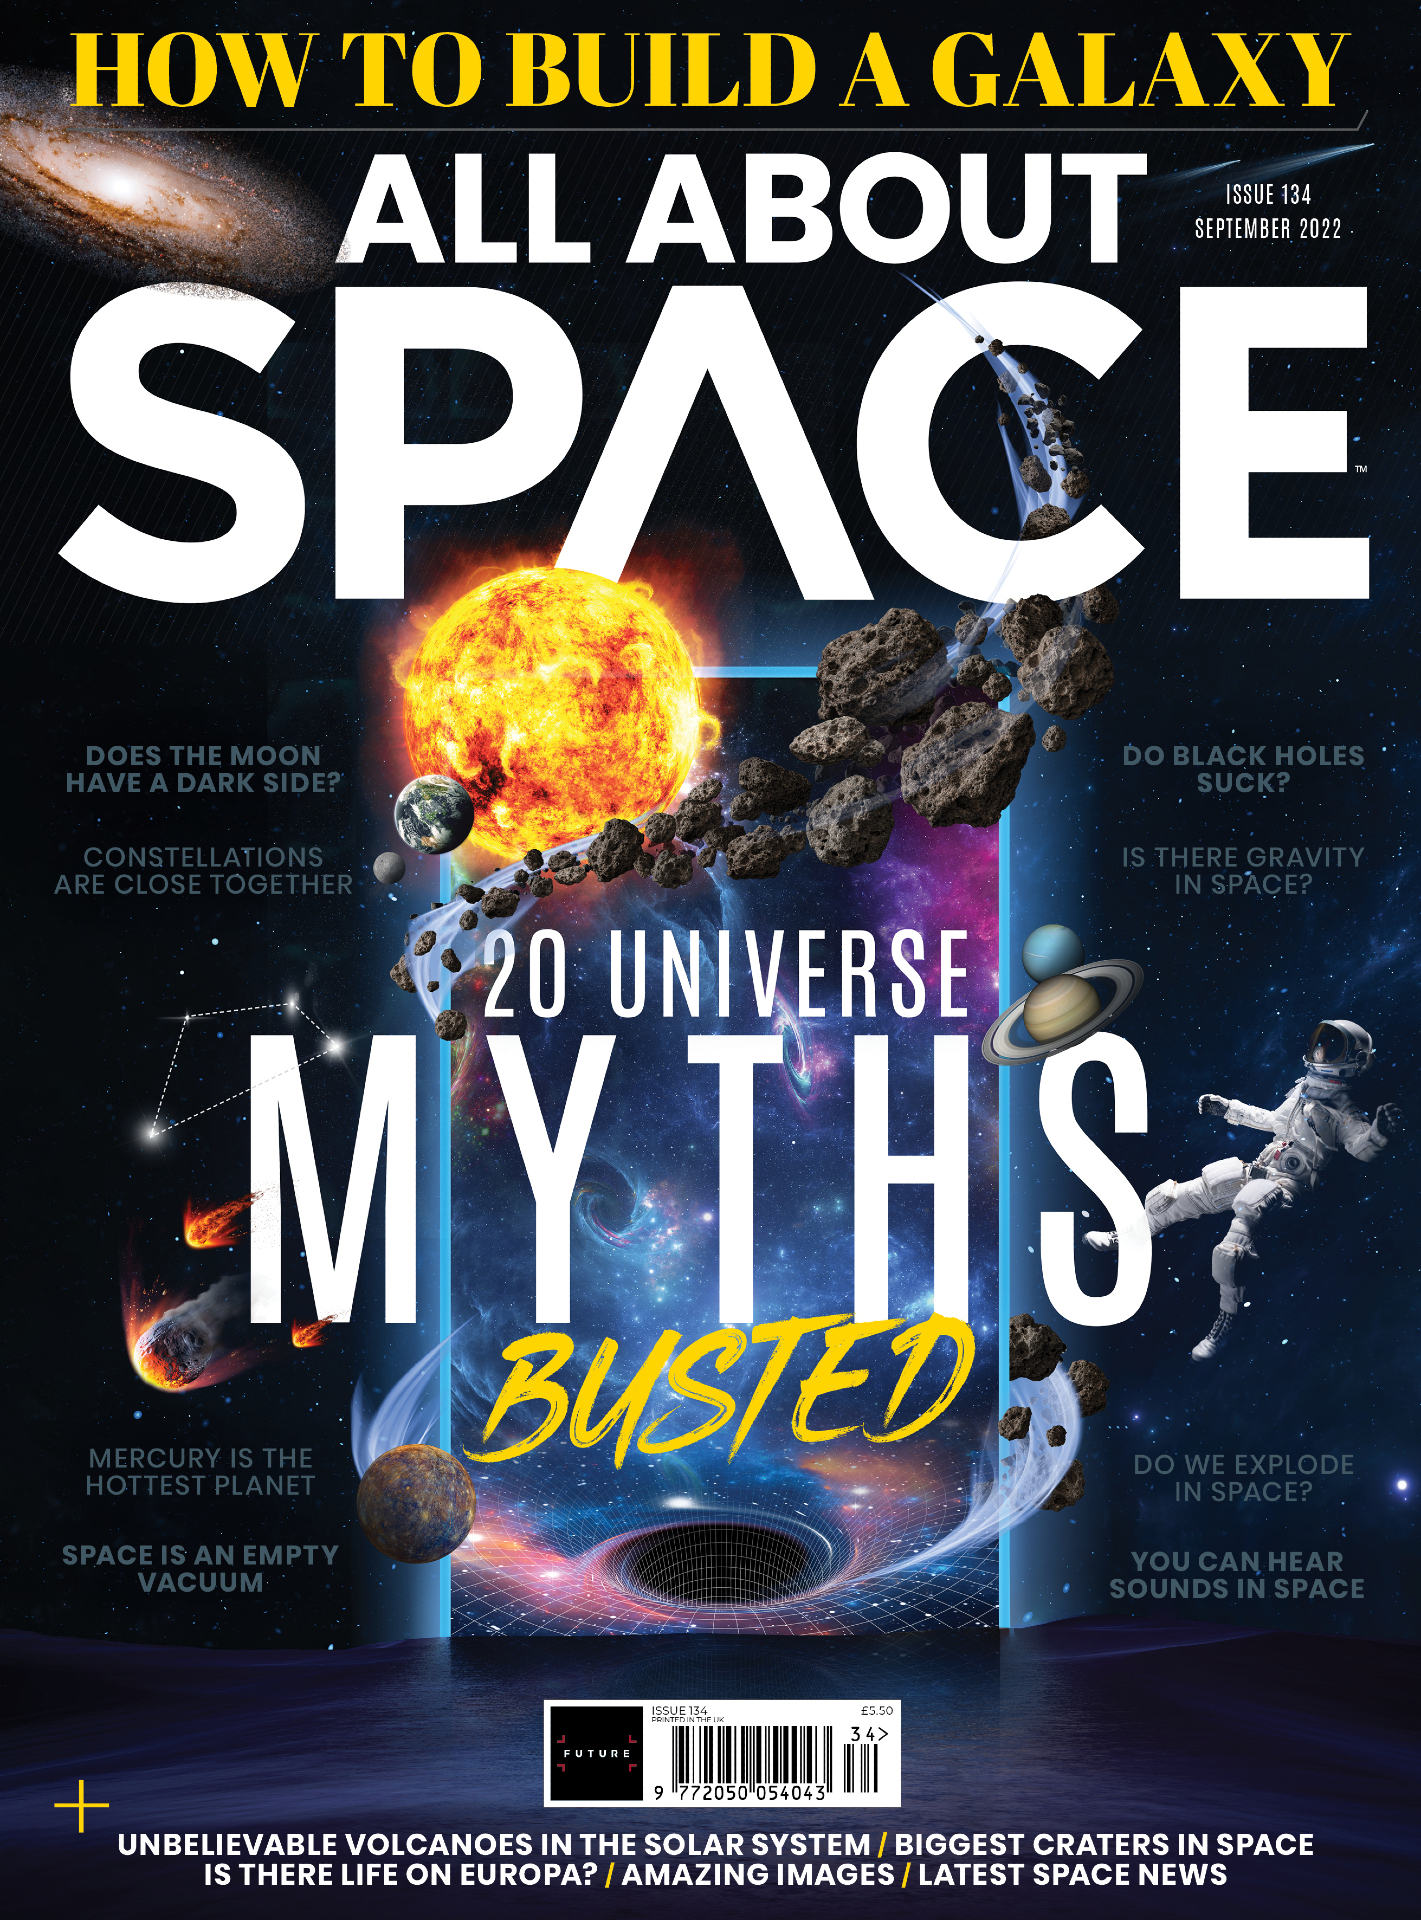 All About Space issue 134.